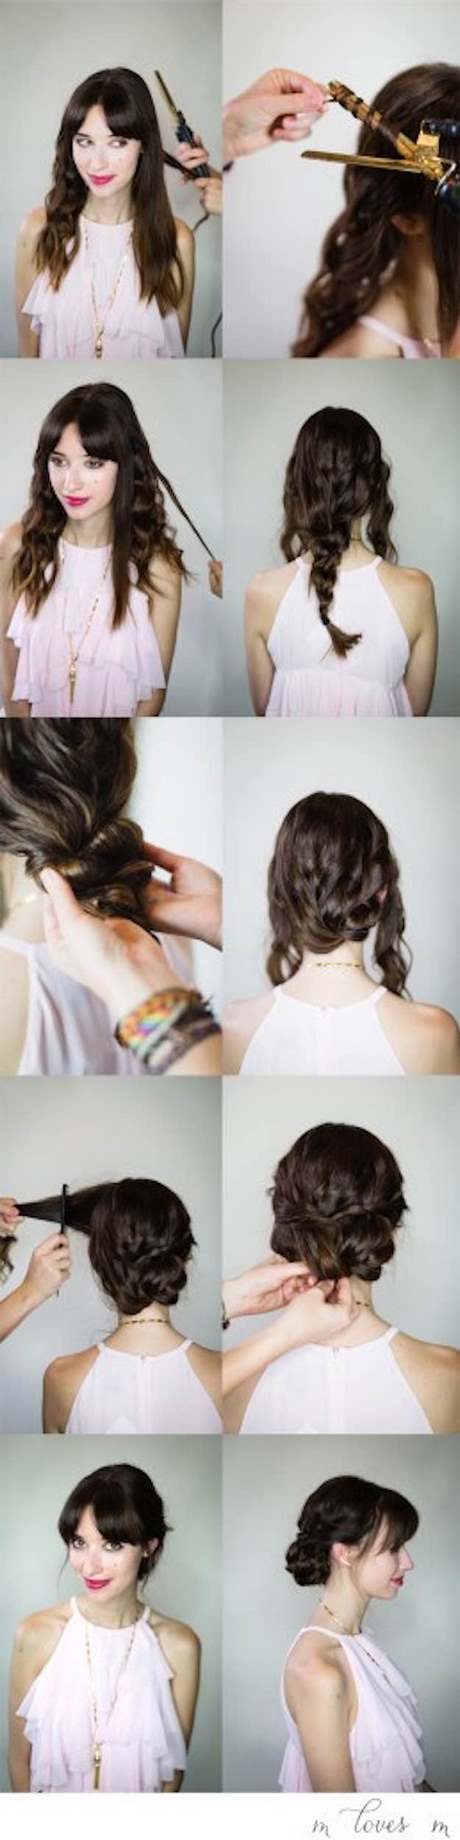 Quick and easy updo hairstyles quick-and-easy-updo-hairstyles-12_17